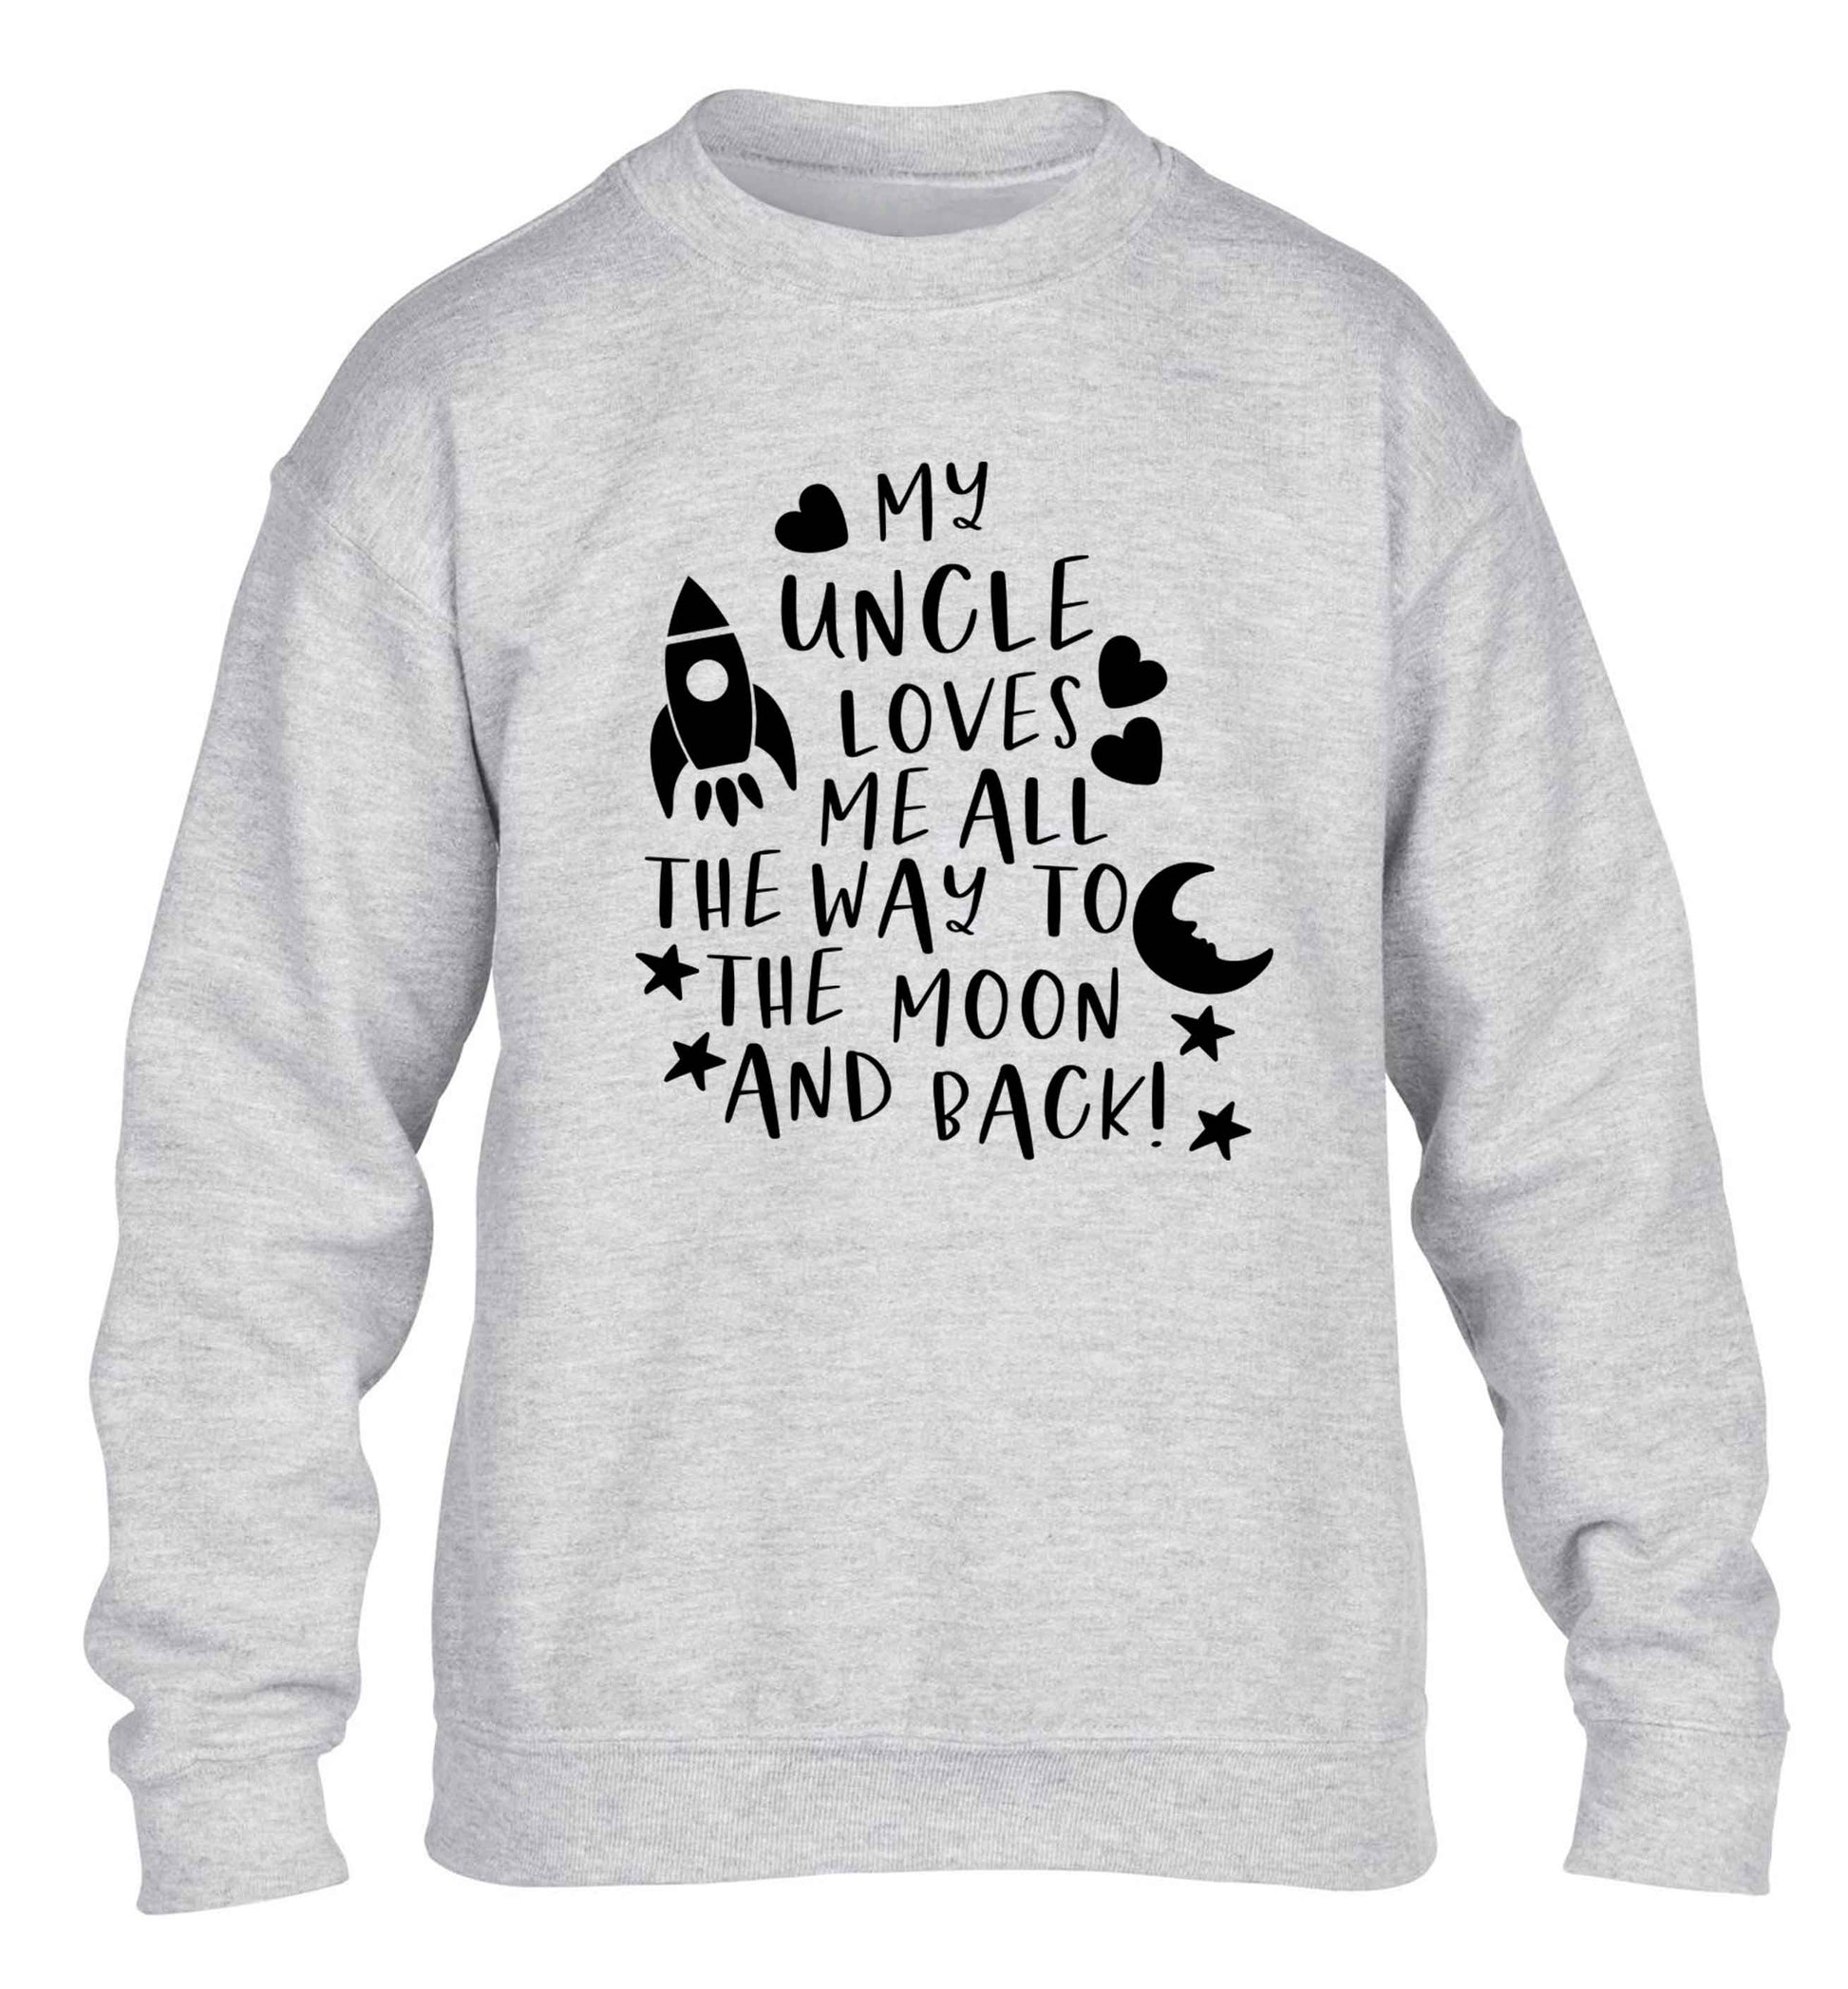 My uncle loves me all the way to the moon and back children's grey sweater 12-13 Years